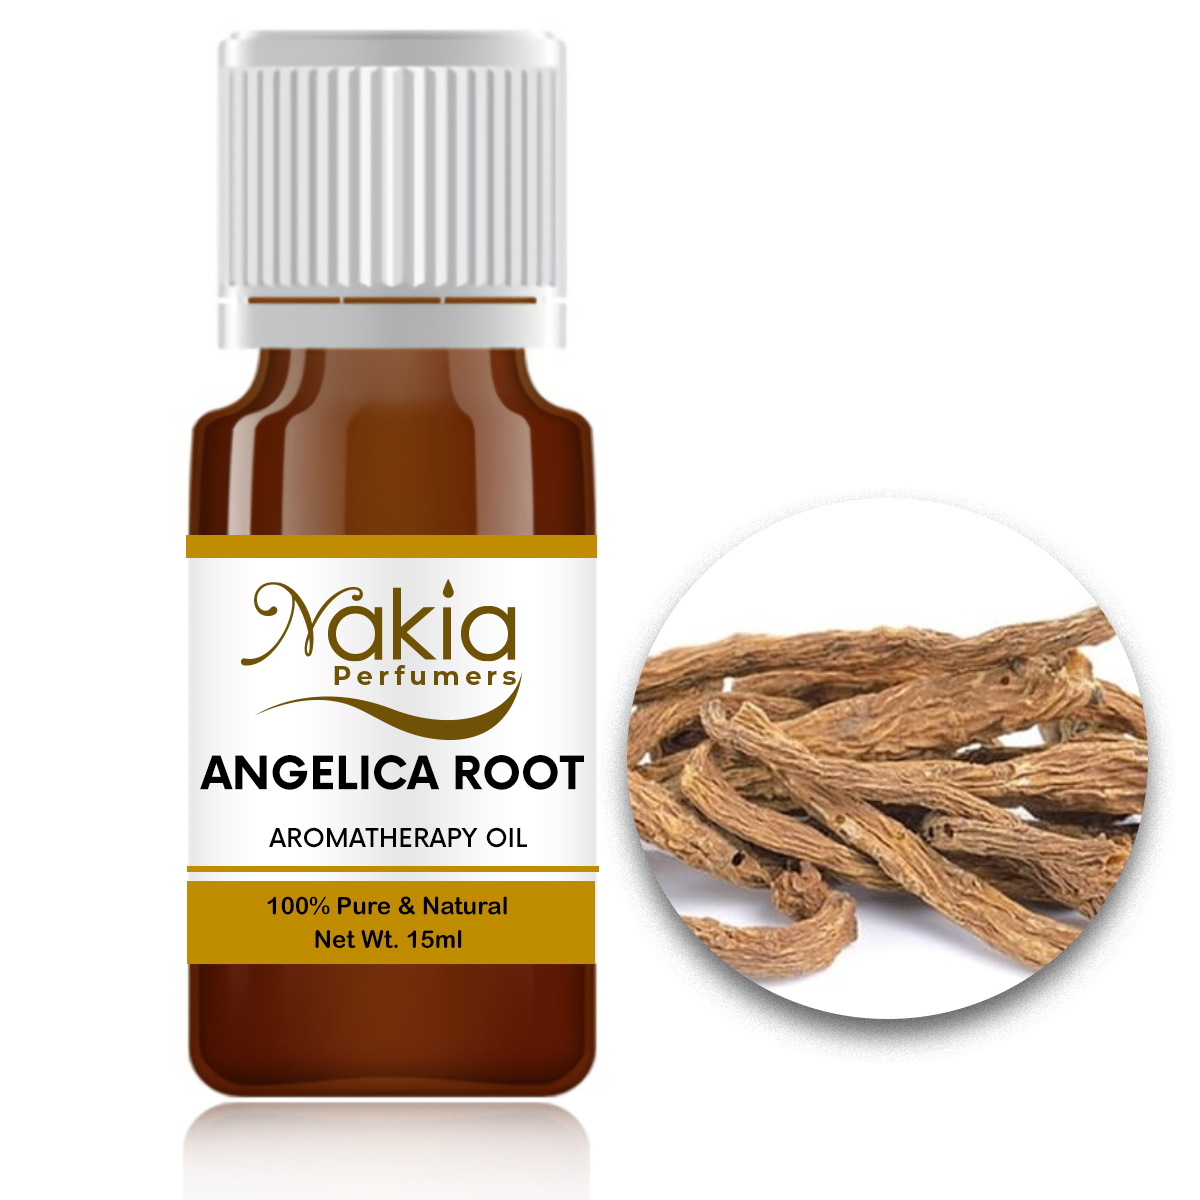 ANGELICA ROOT OIL